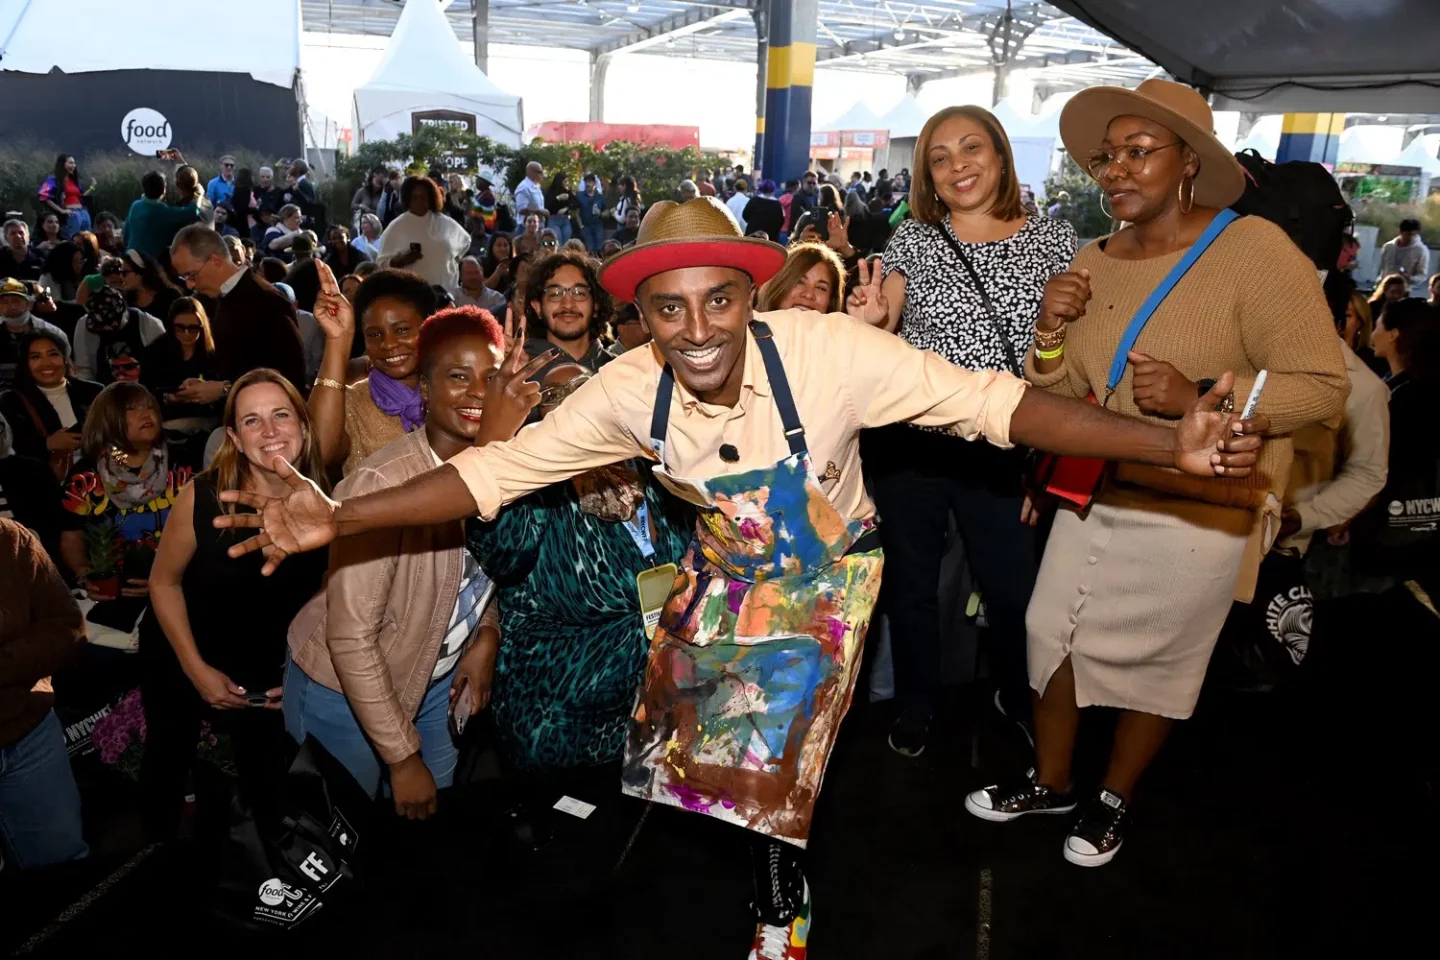 Chef Marcus Samuelsson standing with a group of fans at the New York City Wine & Food Festival